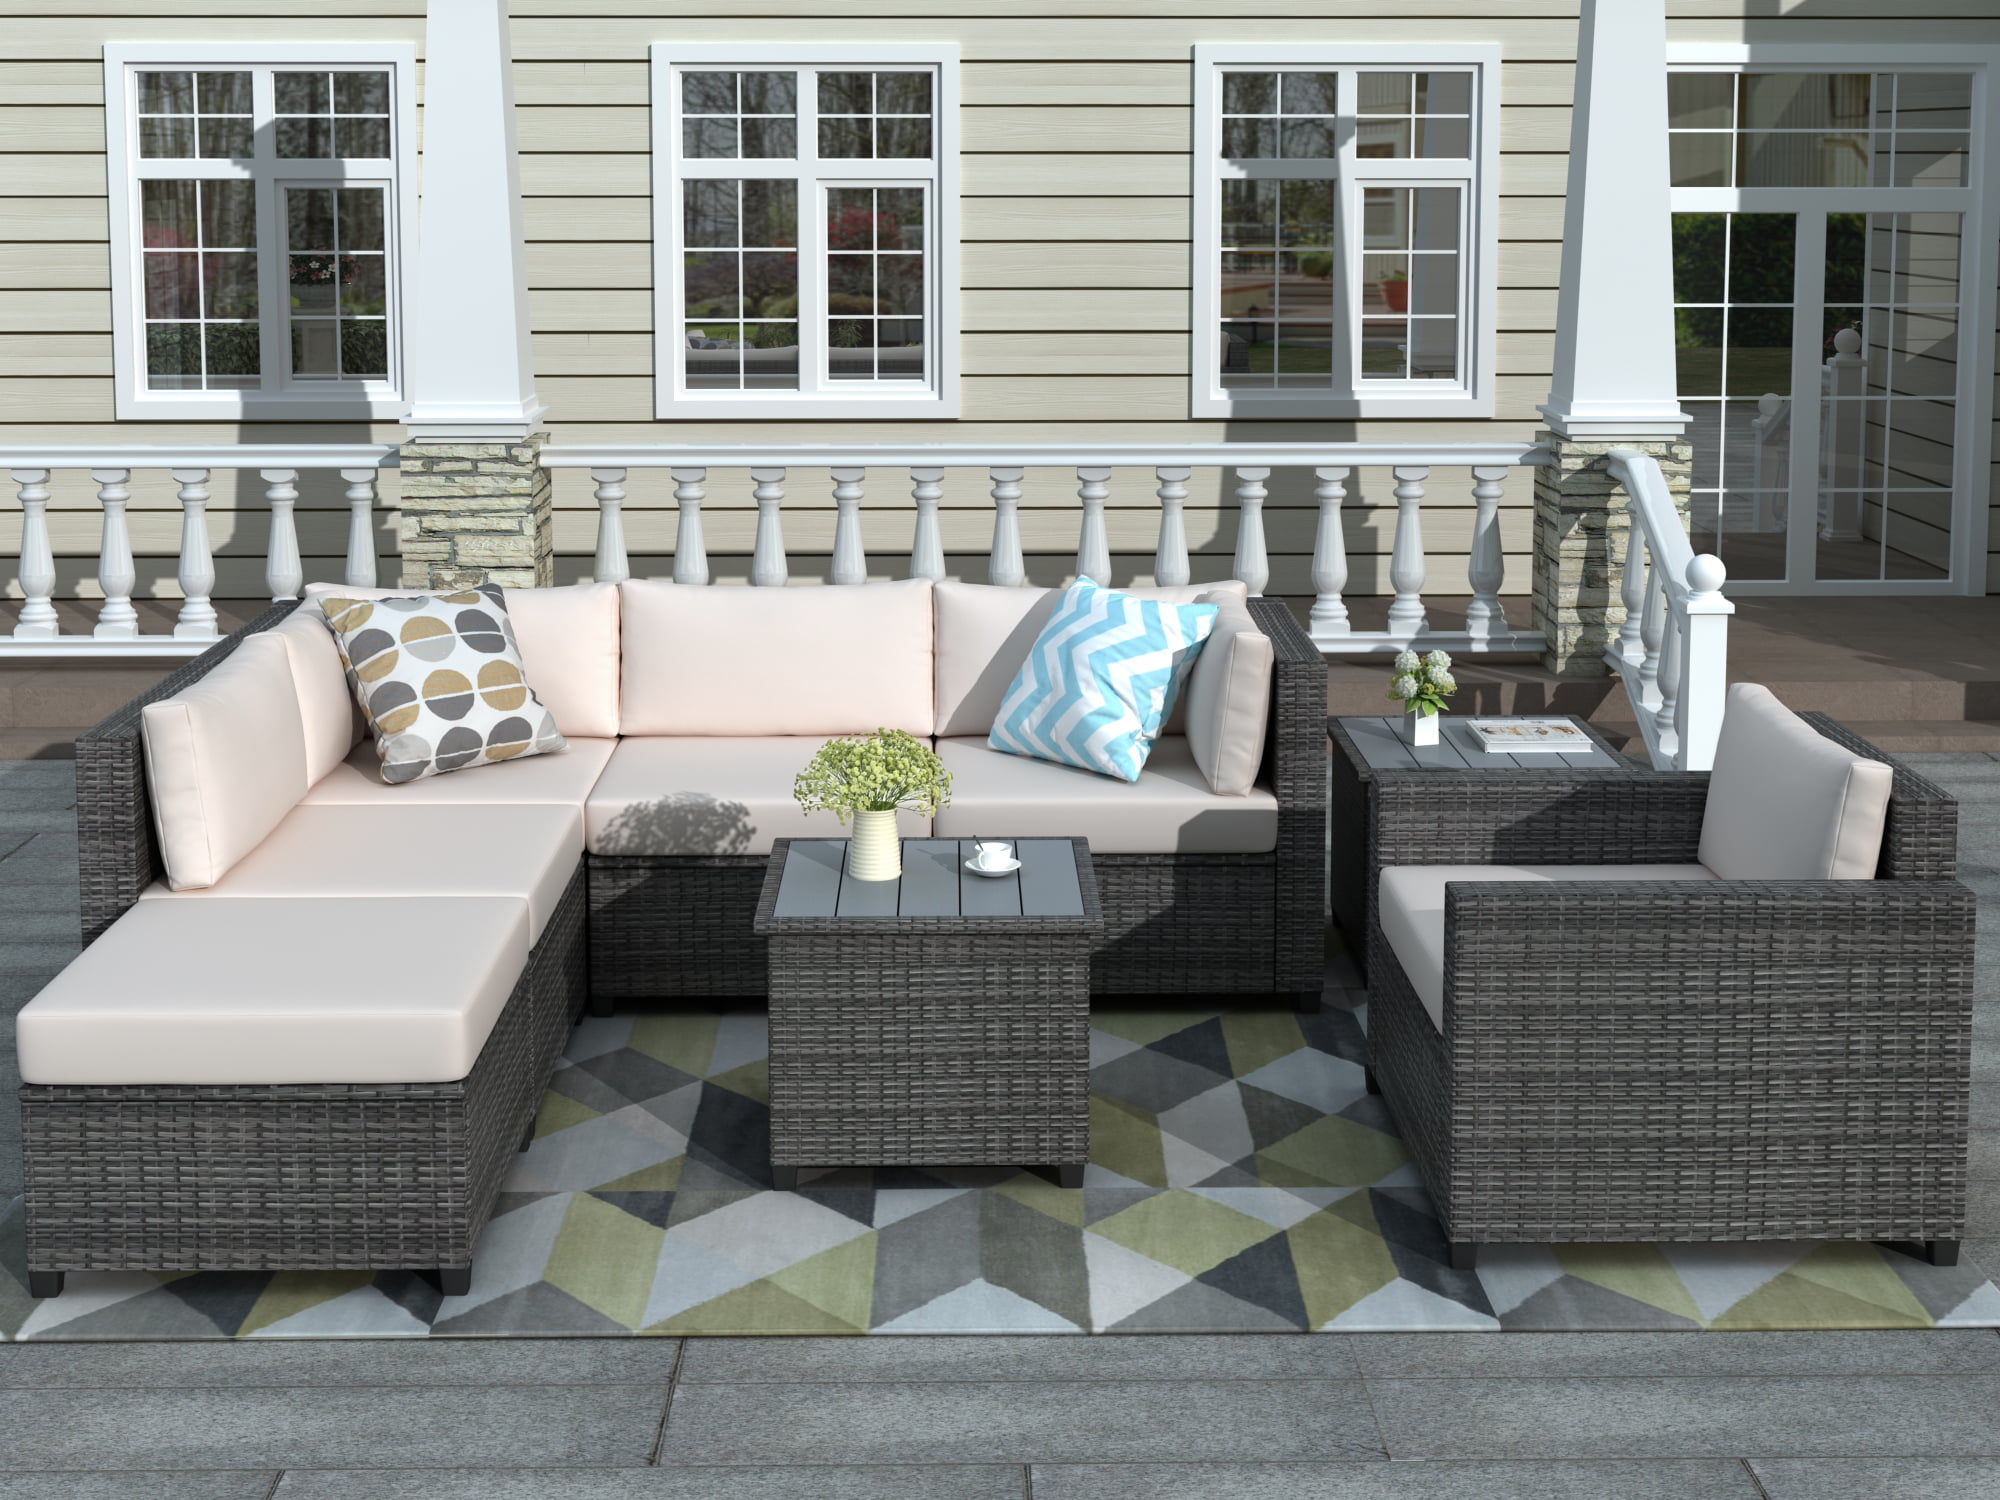 8 Piece Rattan Sectional Seating Group - WY000306AAA